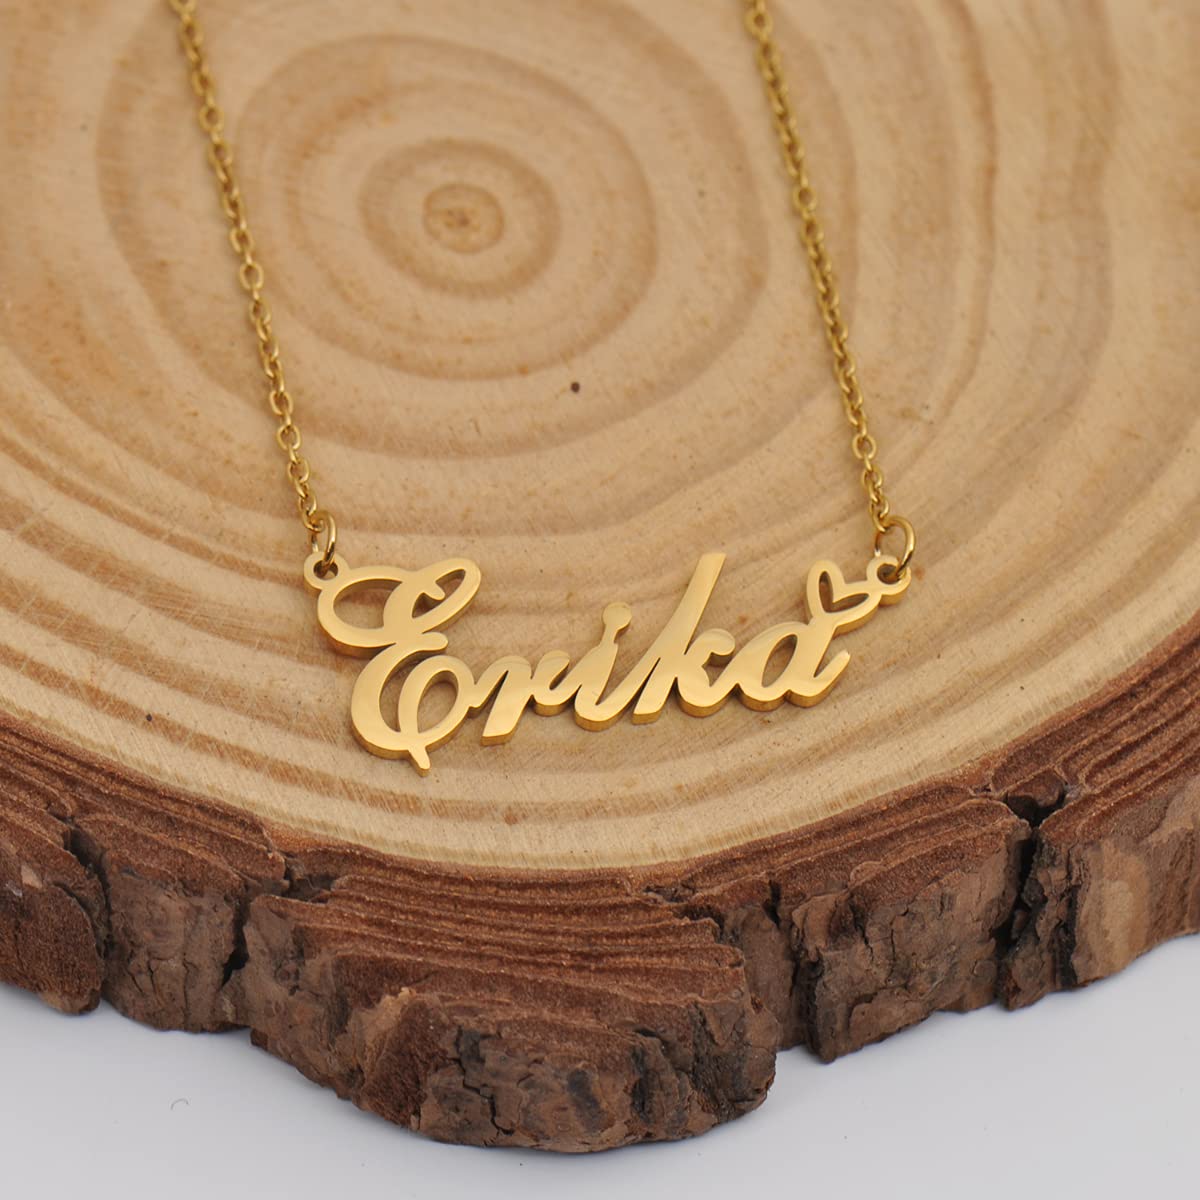 HUAN XUN Personalized Custom Initial Pendant Name Necklaces for Women Girls in Gold Silver